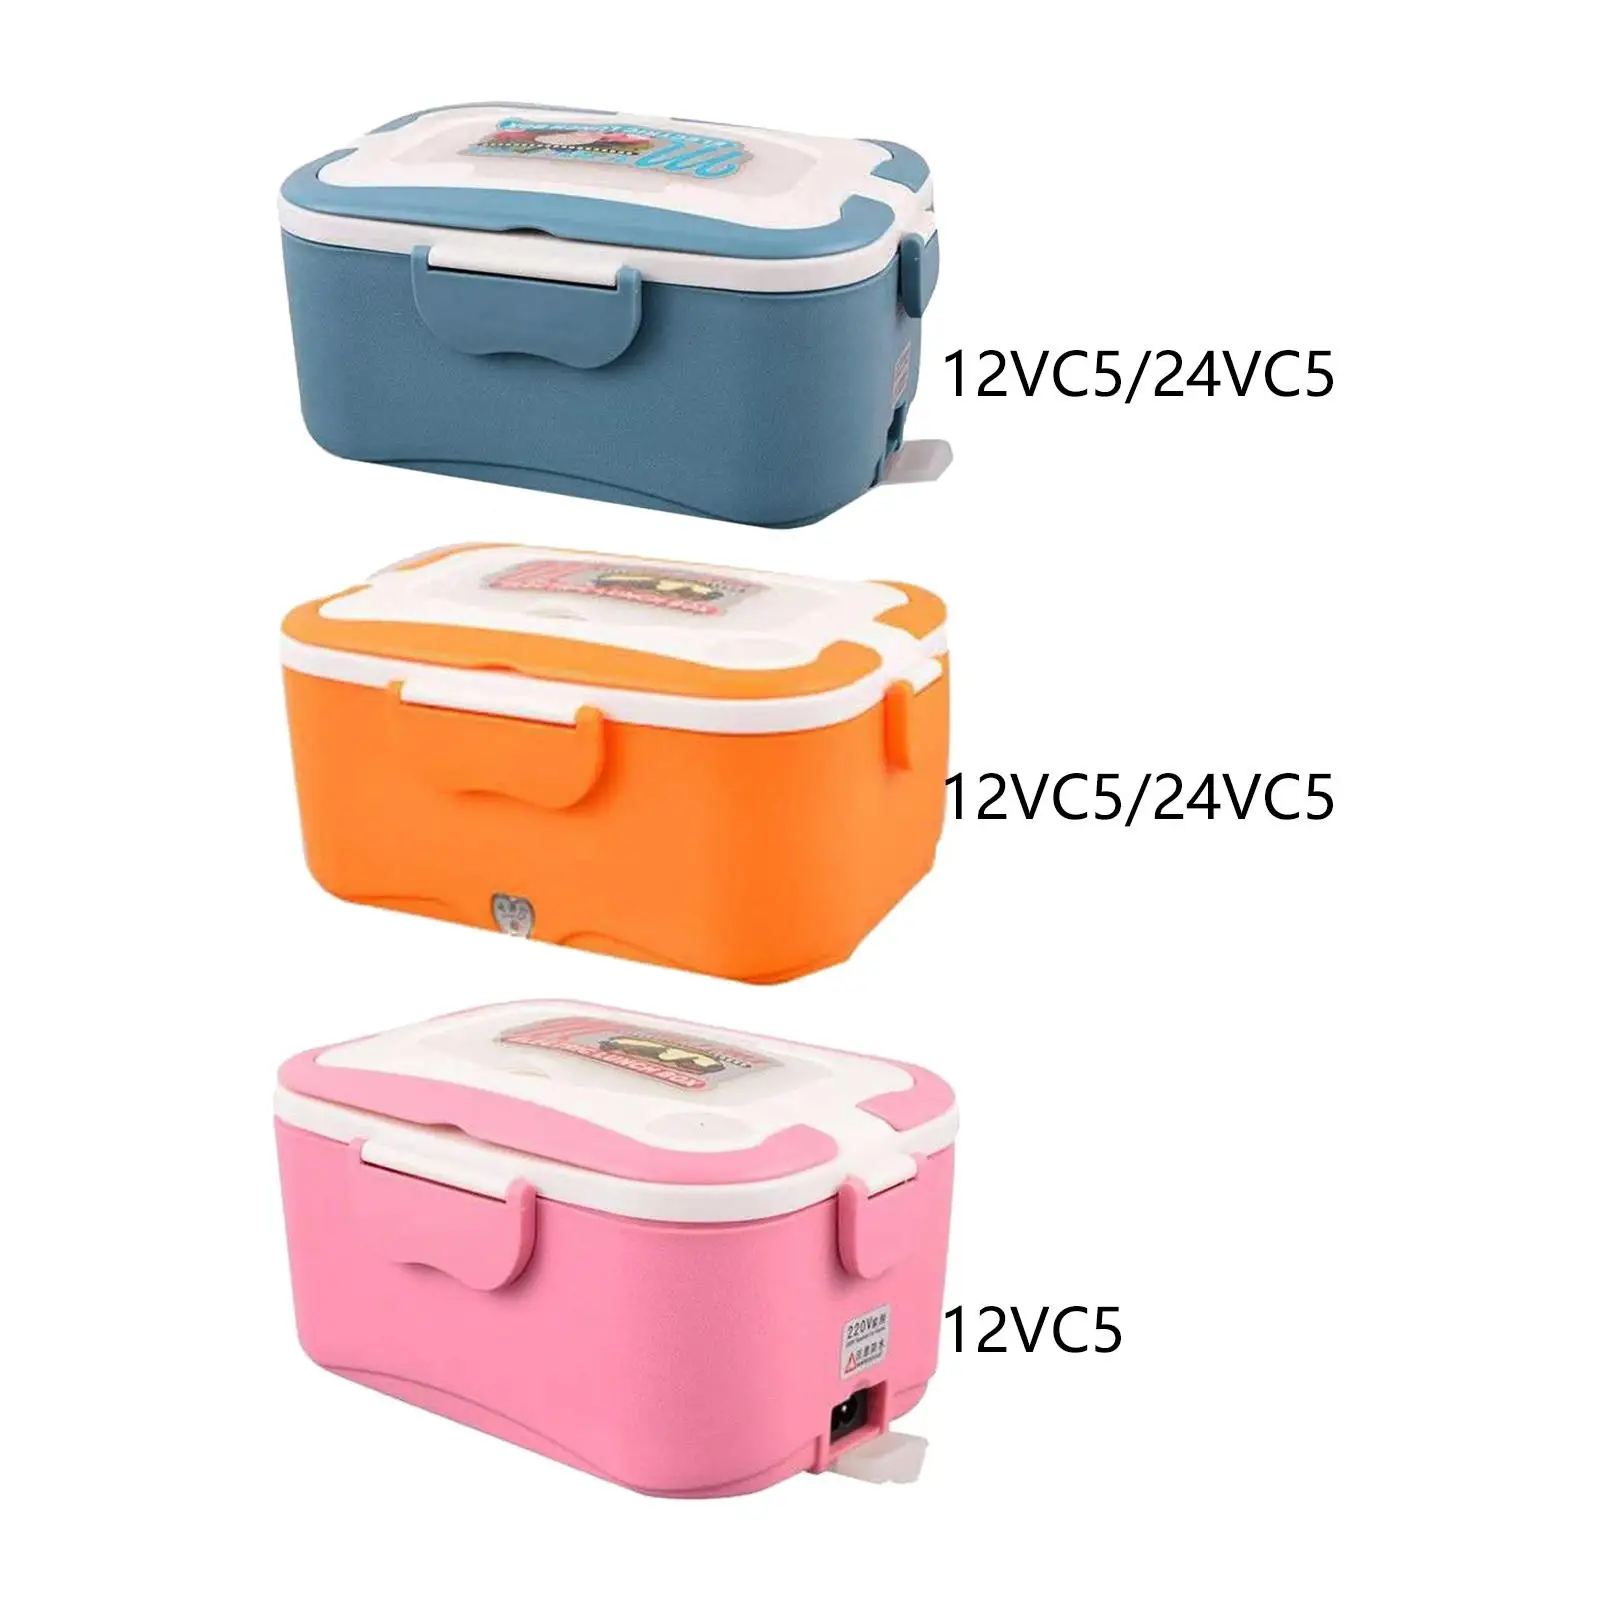 Lunch Box Removable Stainless Steel Container for Home Traveling